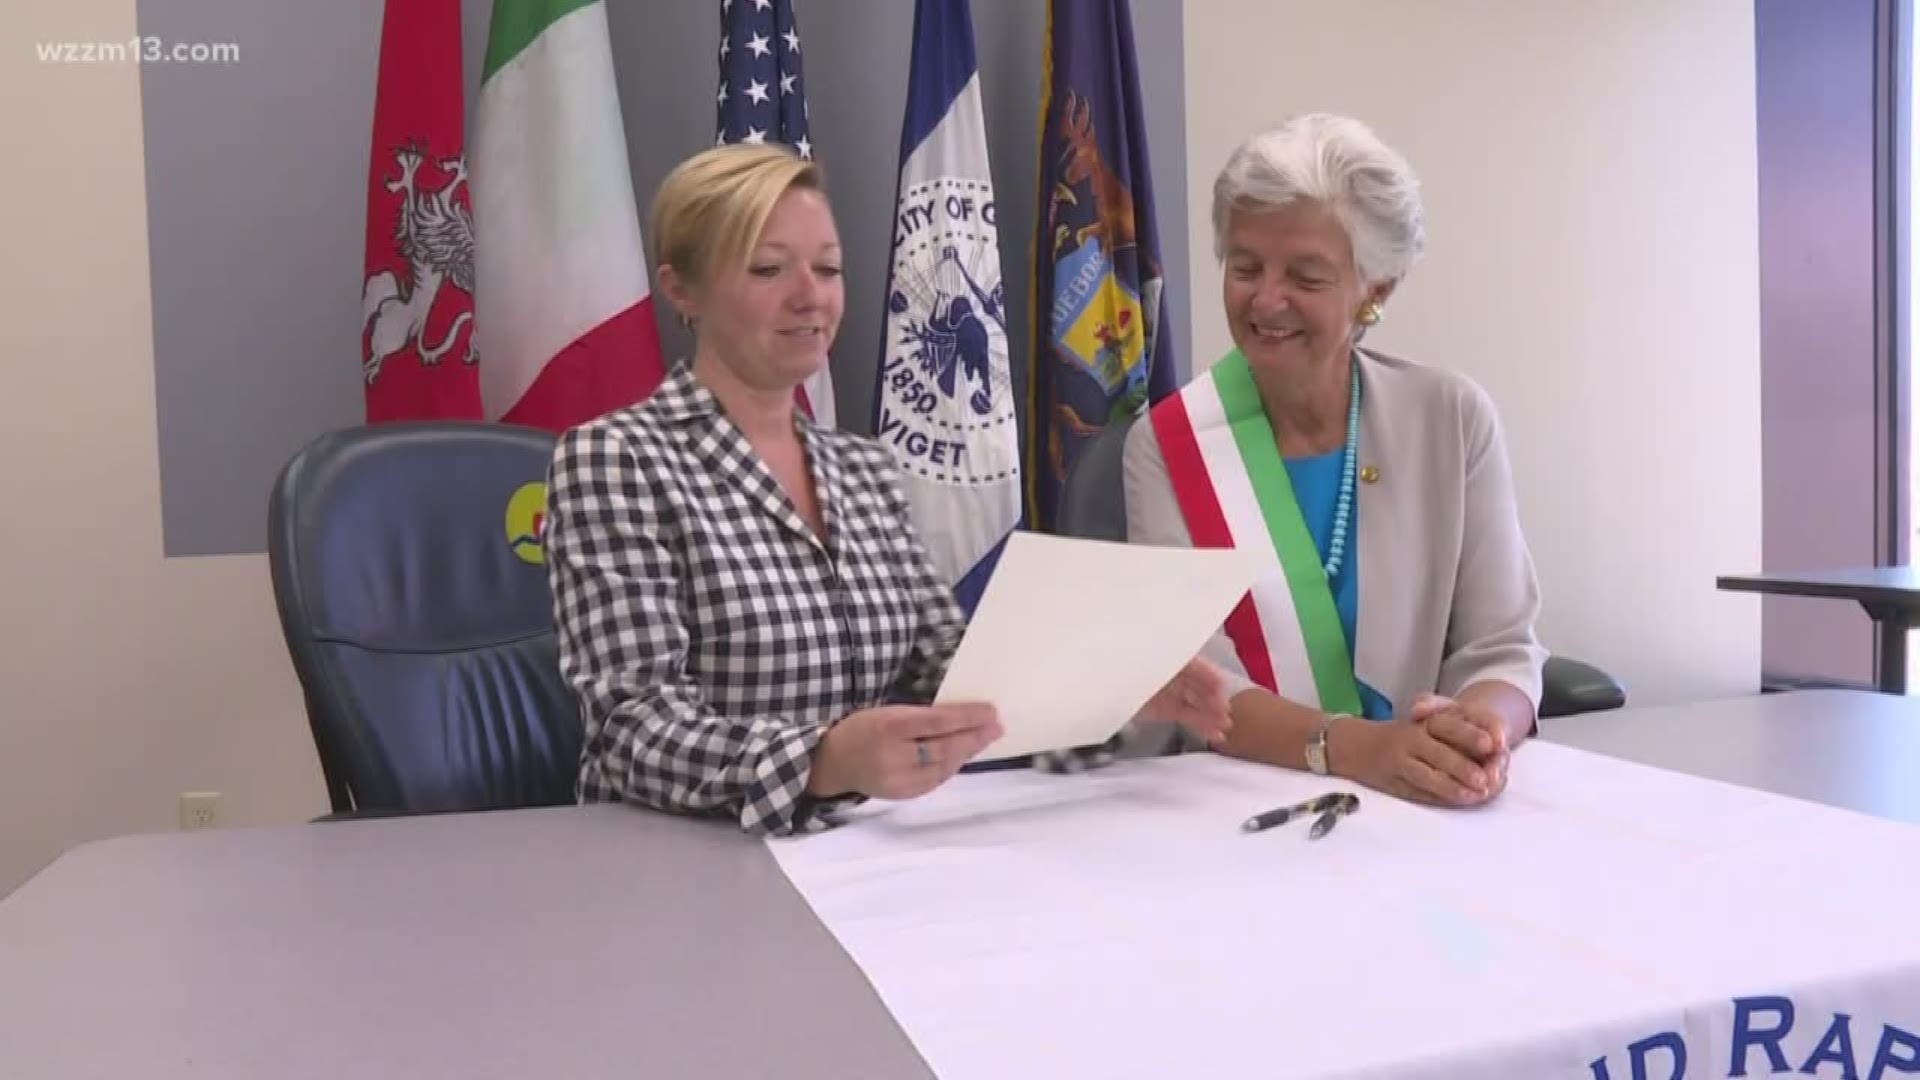 Grand Rapids celebrates relationship with sister city in Italy